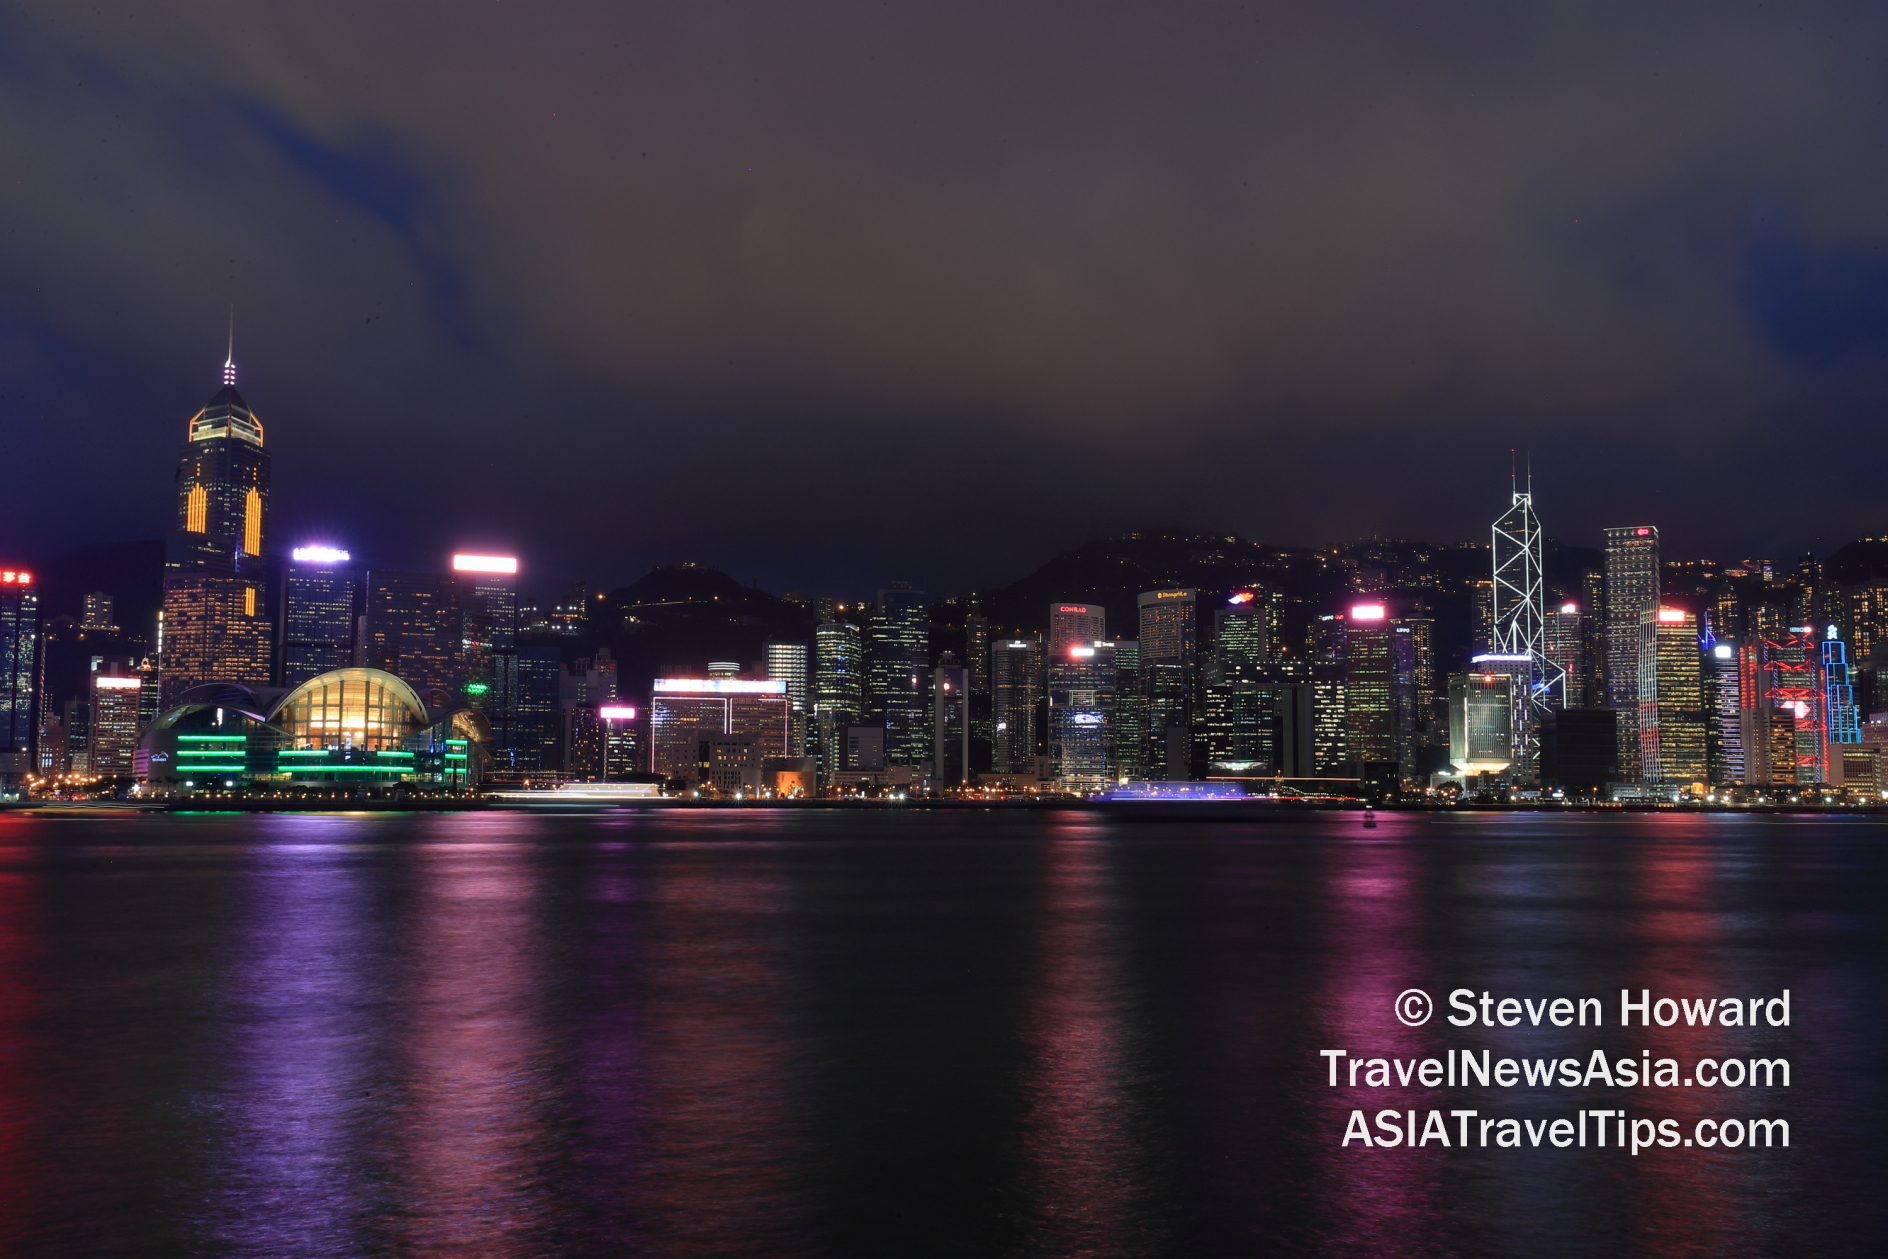 Victoria Harbour is just one thing that makes Hong Kong one of the world's greatest cities. Picture by Steven Howard of TravelNewsAsia.com Click to enlarge.